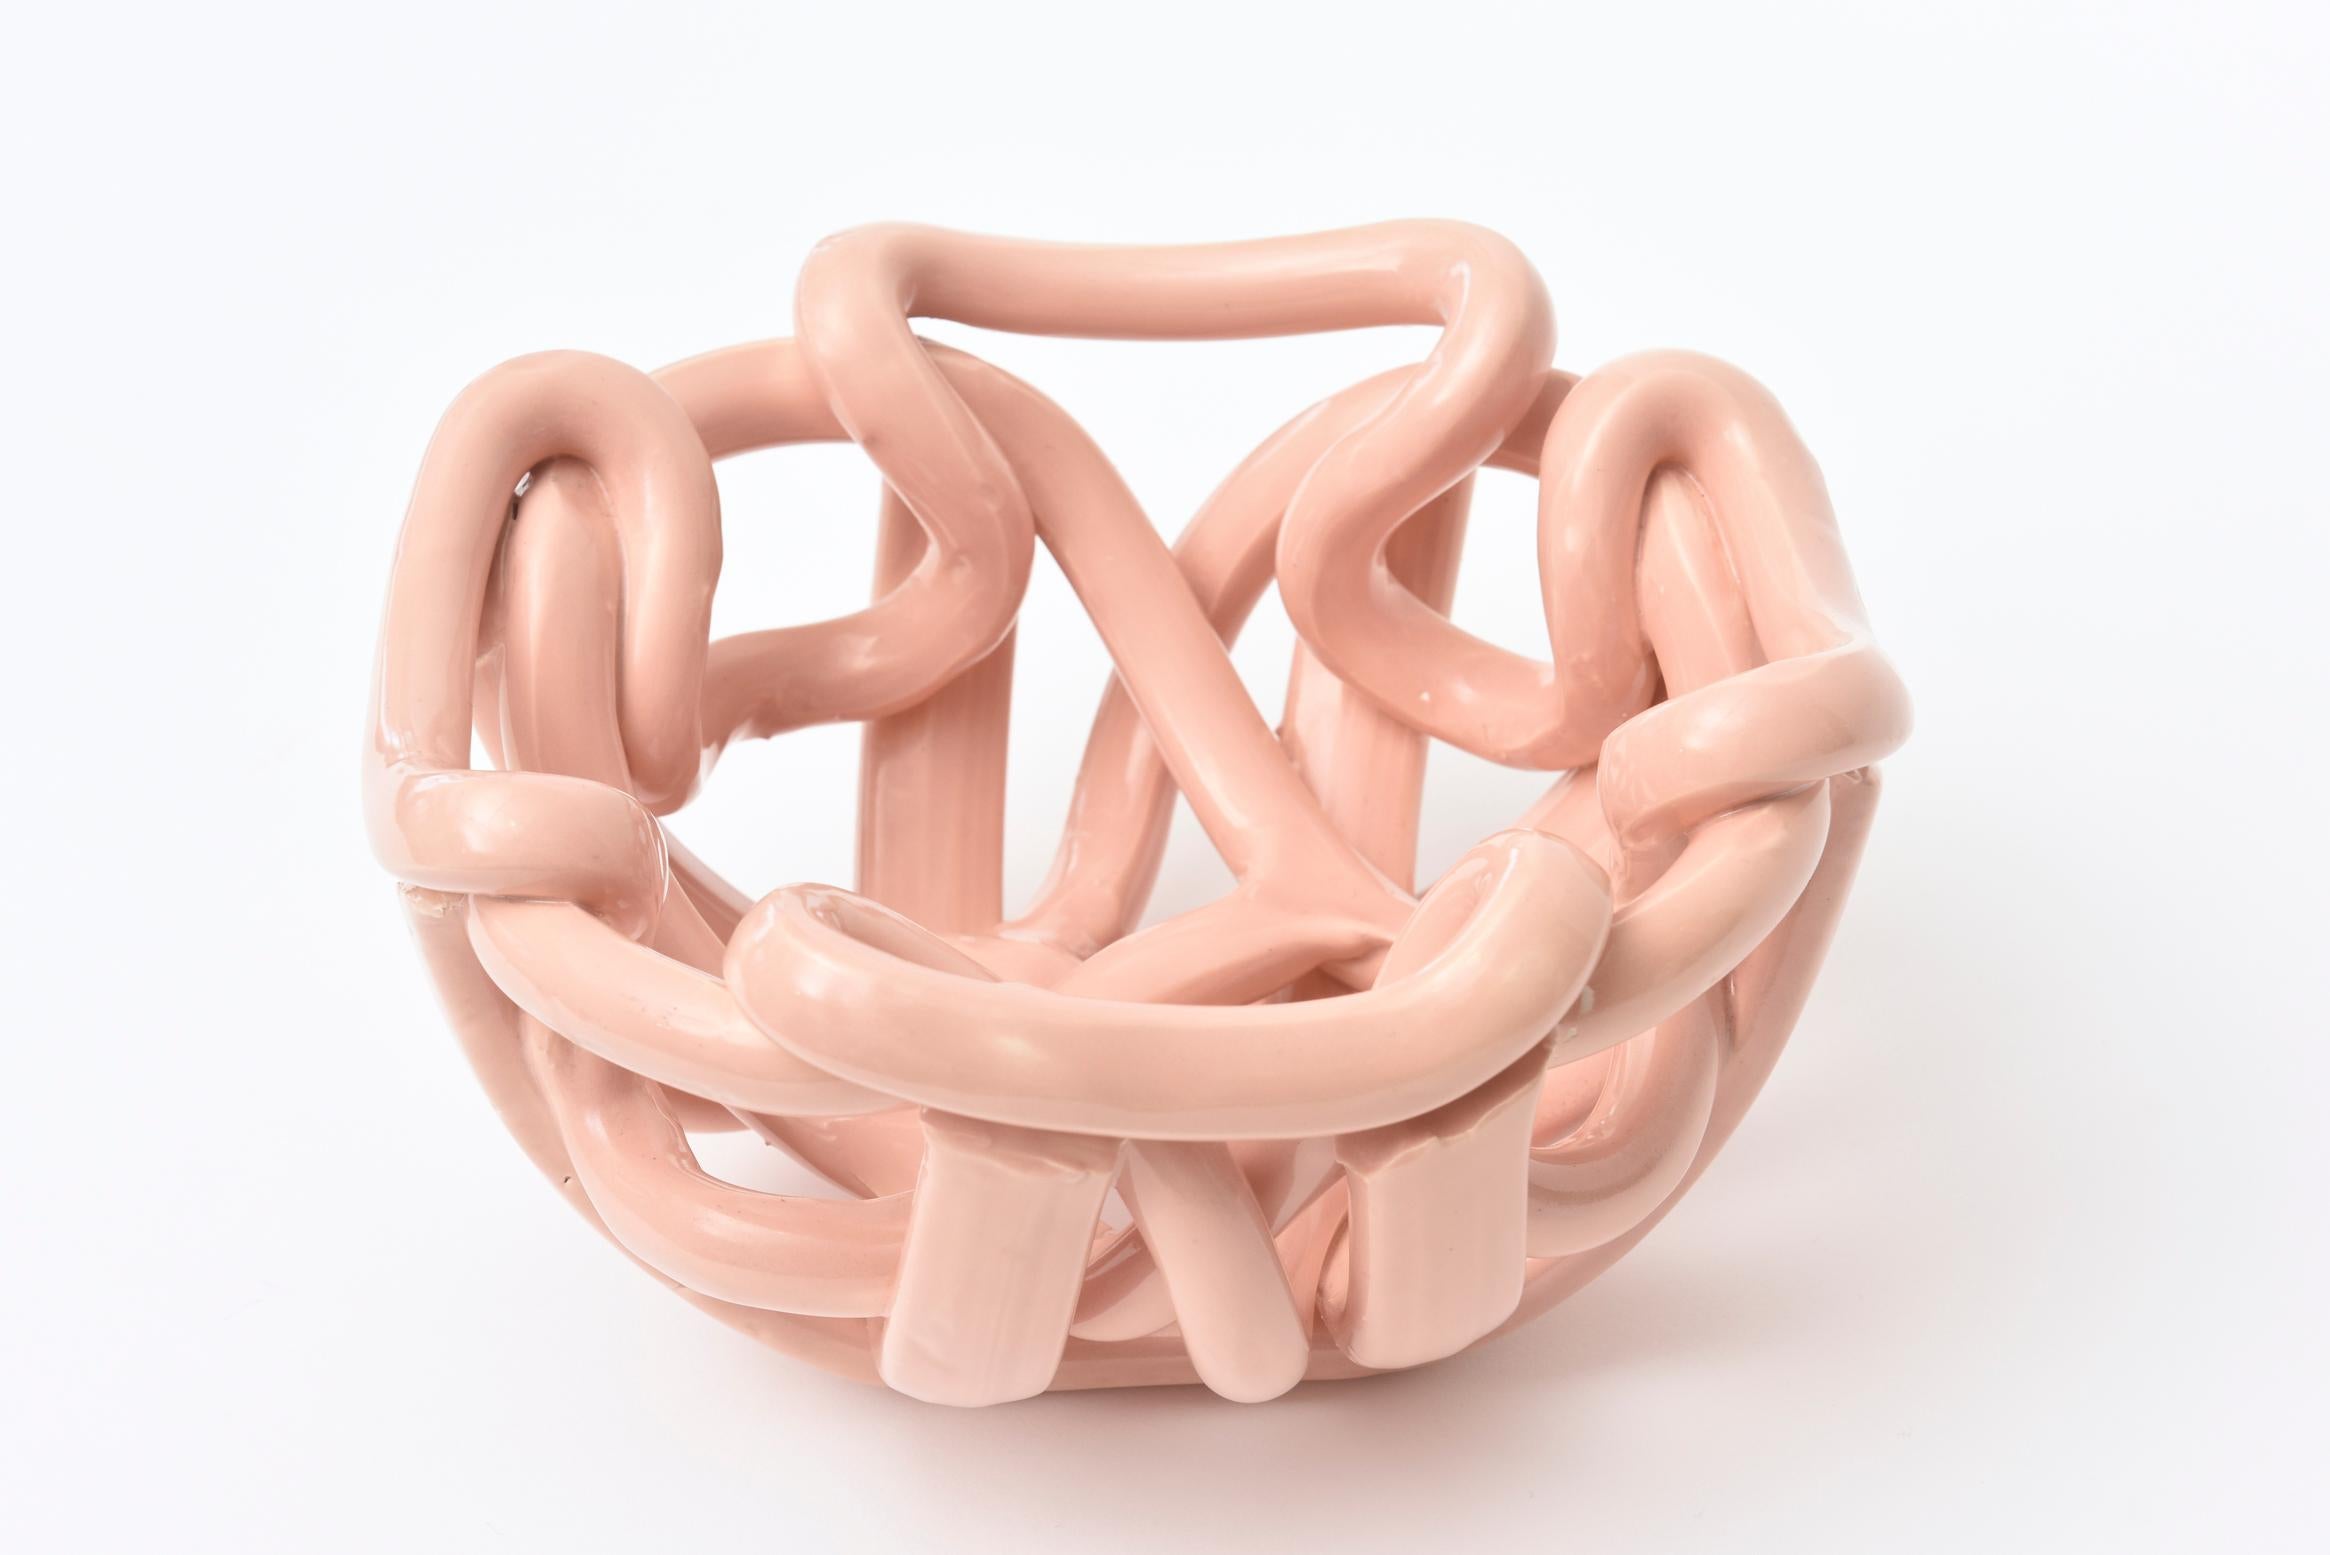 This lovely vintage glazed ceramic bowl has twists and turns of coiled ceramic. It is from the 1970s. The color is one of a dusty pink meets coral peach. The color looks retro and is organic modern. It is great as a decorative sculptural bowl for a